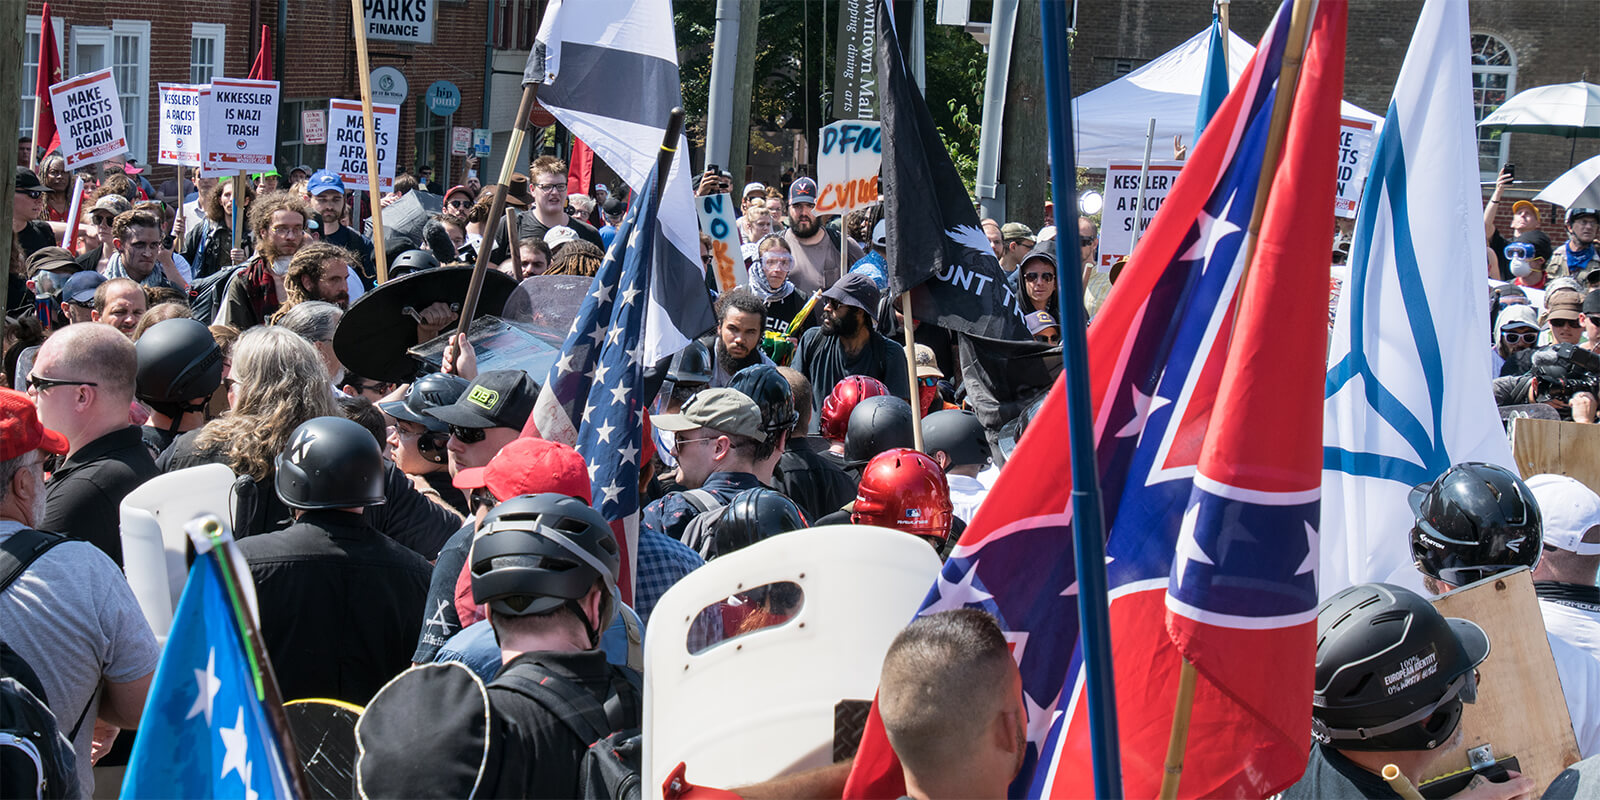 AFSCME Condemns the Hateful Acts in Charlottesville 